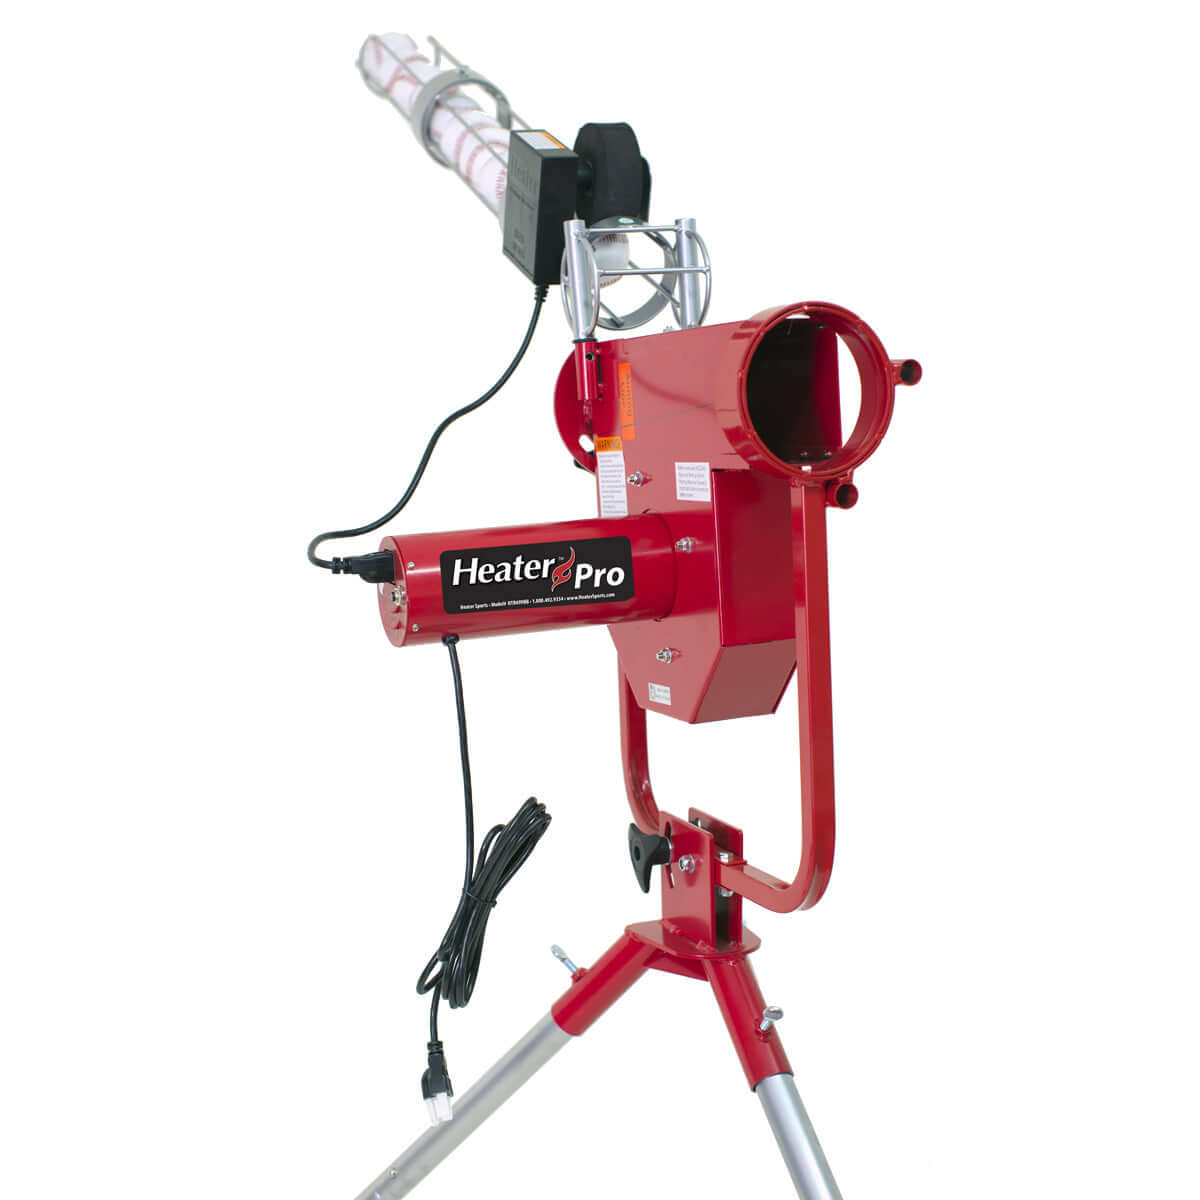 Fastball &amp; Curveball 52 MPH Pitching Machine With Auto Ball Feeder-Heater Sports - Pitch Machine Pros